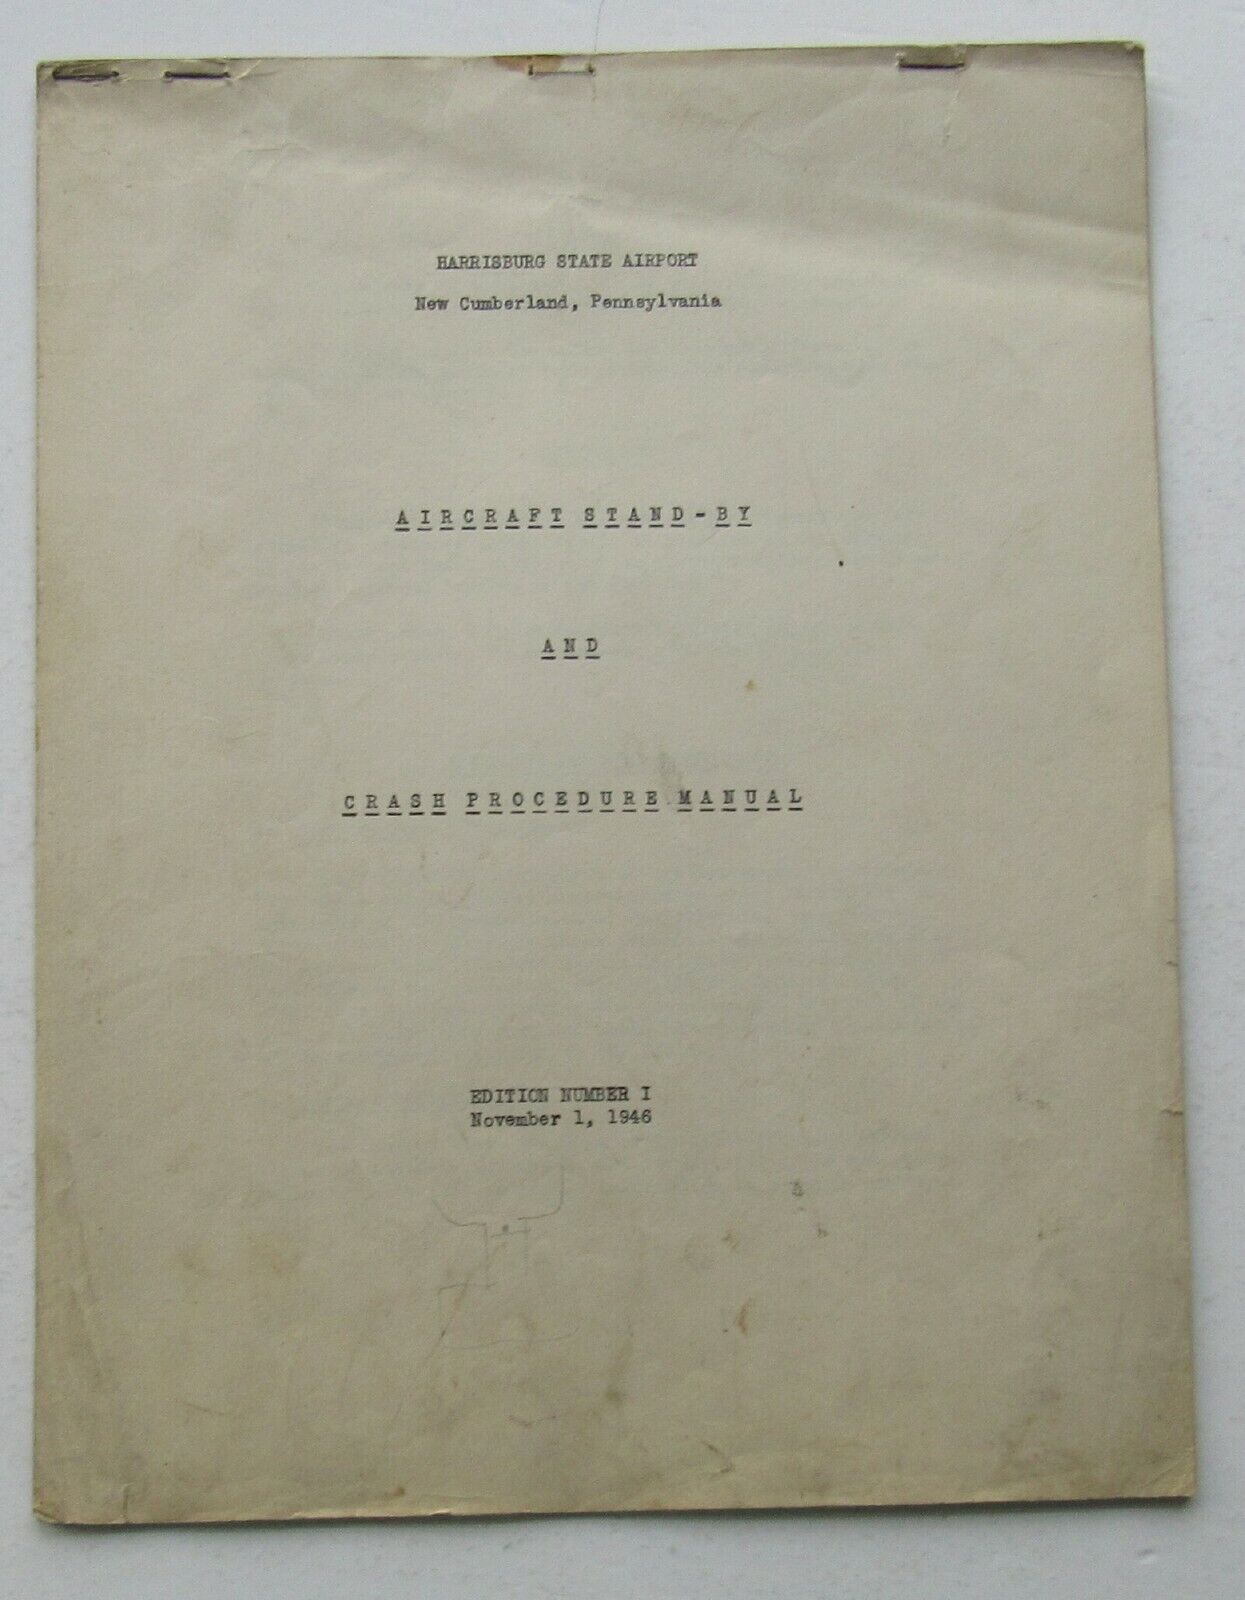 Harrisburg State Airport Aircraft Stand-By and Crash Procedure Manual c 1946